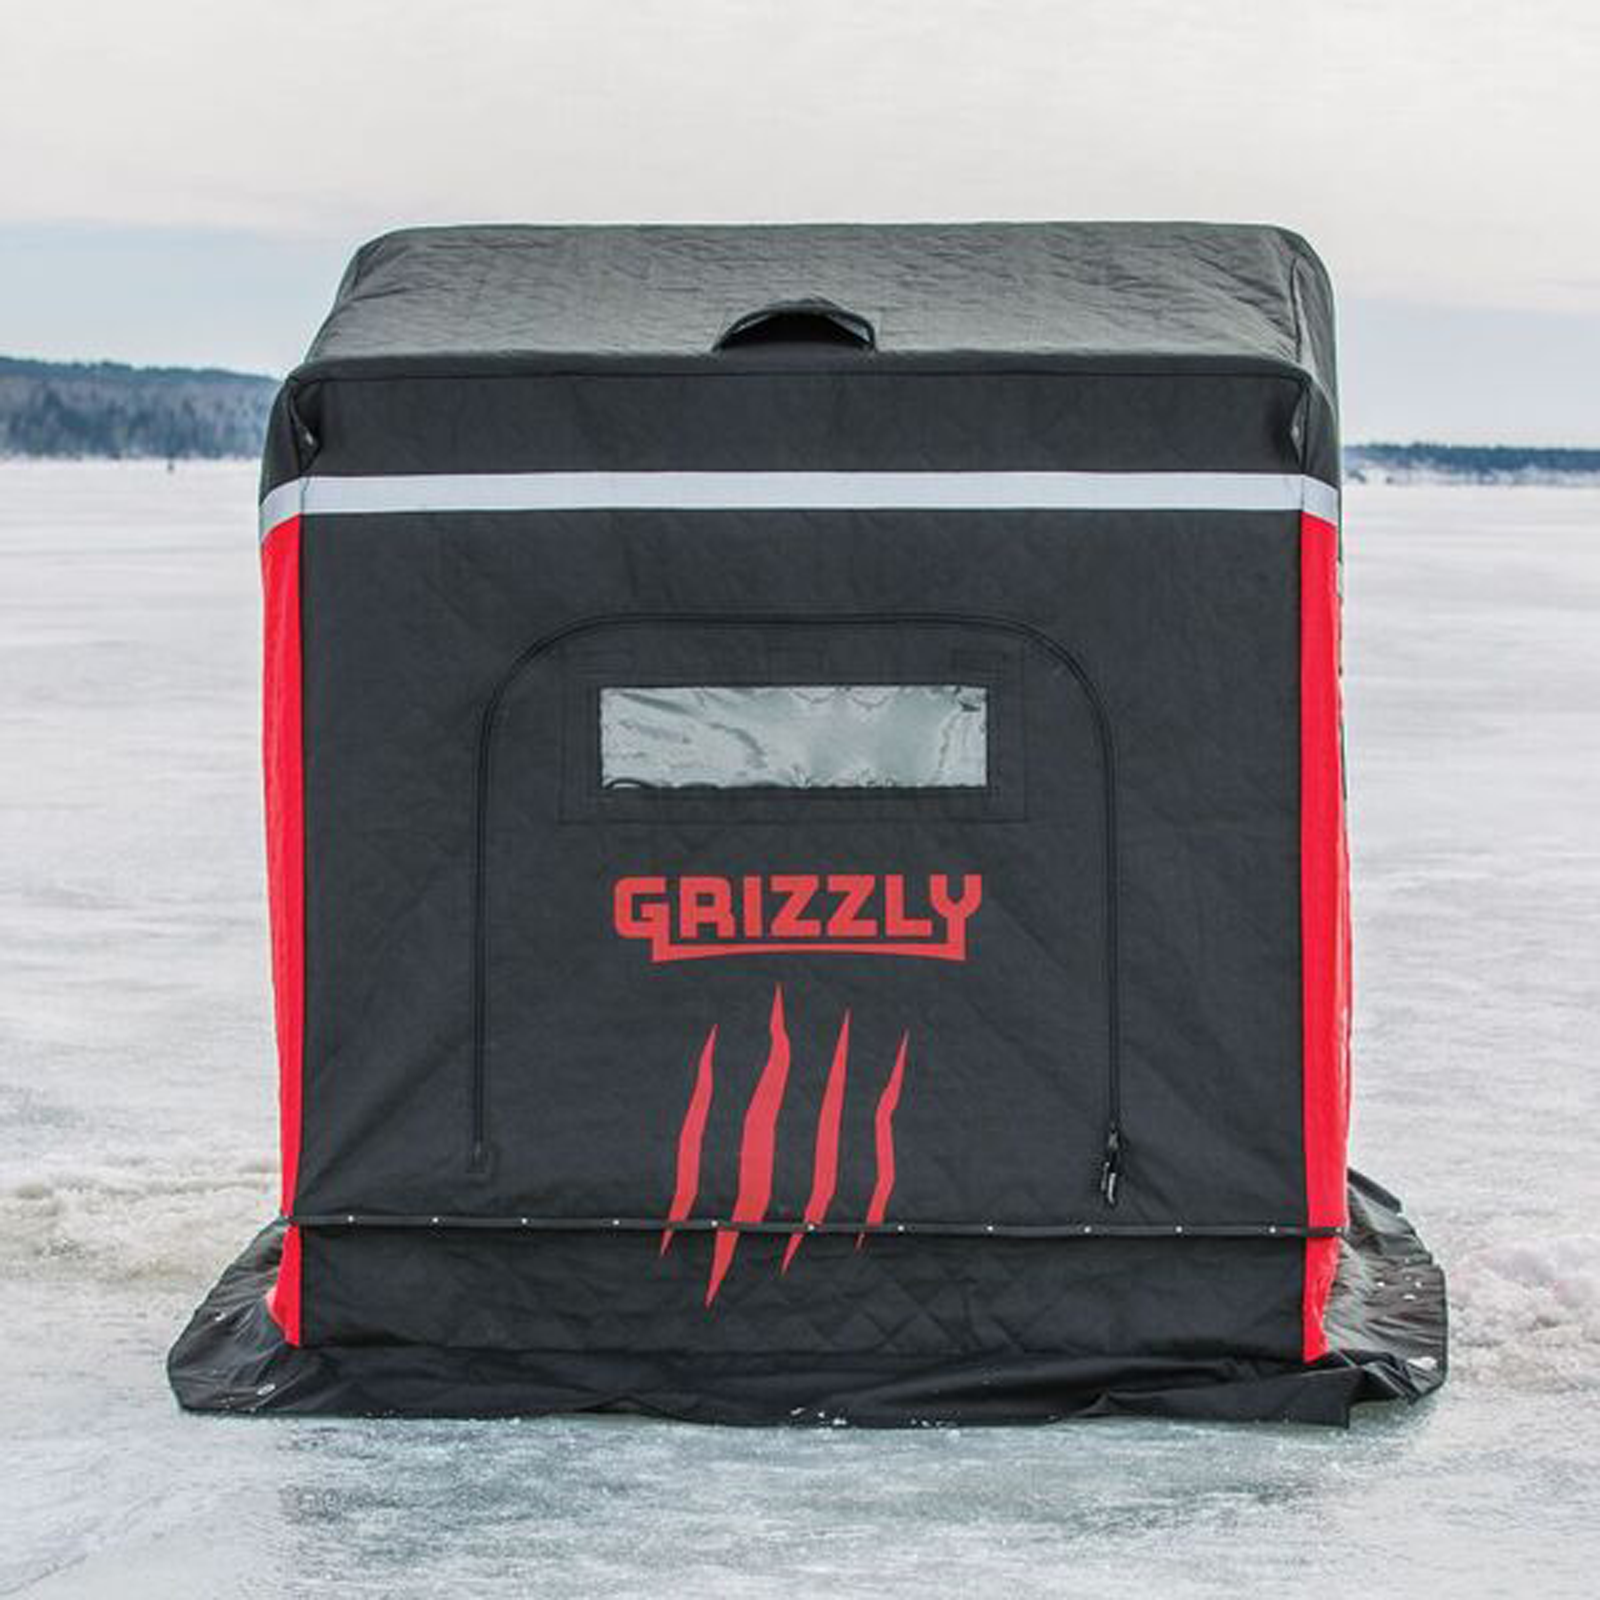 Eskimo Eskape 2800 Insulated 2-3 Person Ice Fishing Side-Door Sled Shelter  with 70-Inch Sled and 2 Swivel Seats, Red/Black, Shelters -  Canada